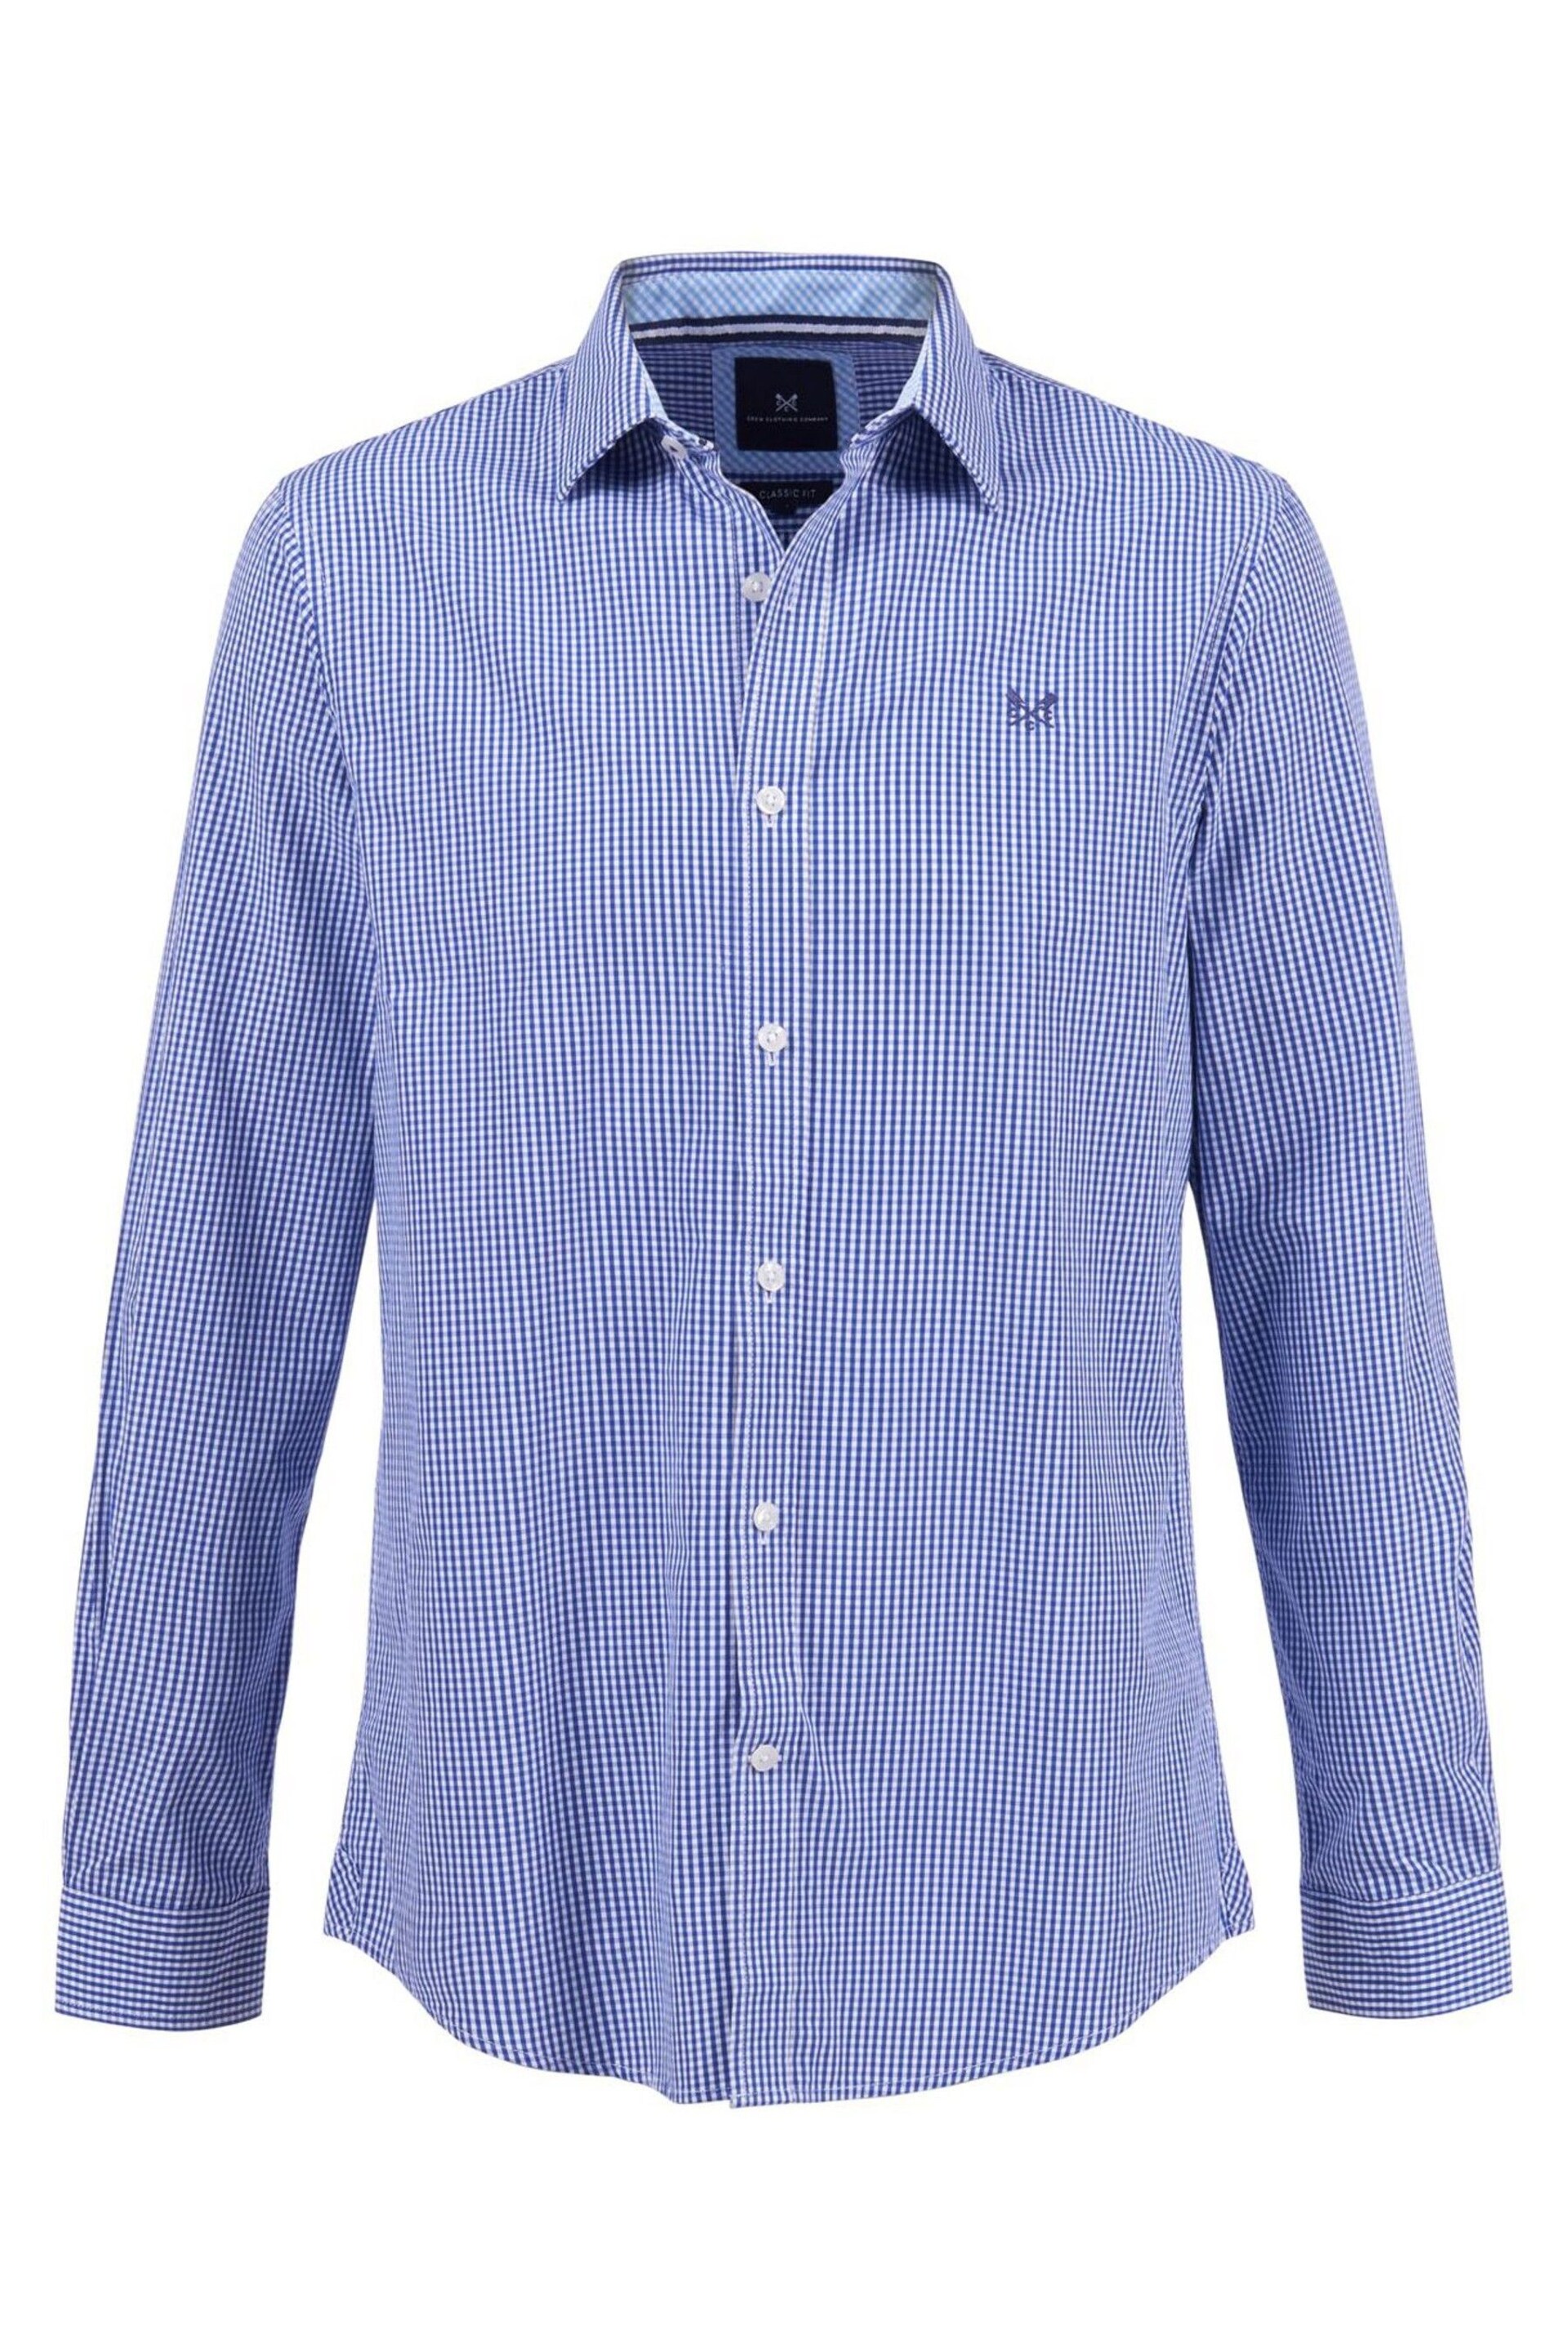 Crew Clothing Classic Fit Micro Gingham Shirt - Image 4 of 4